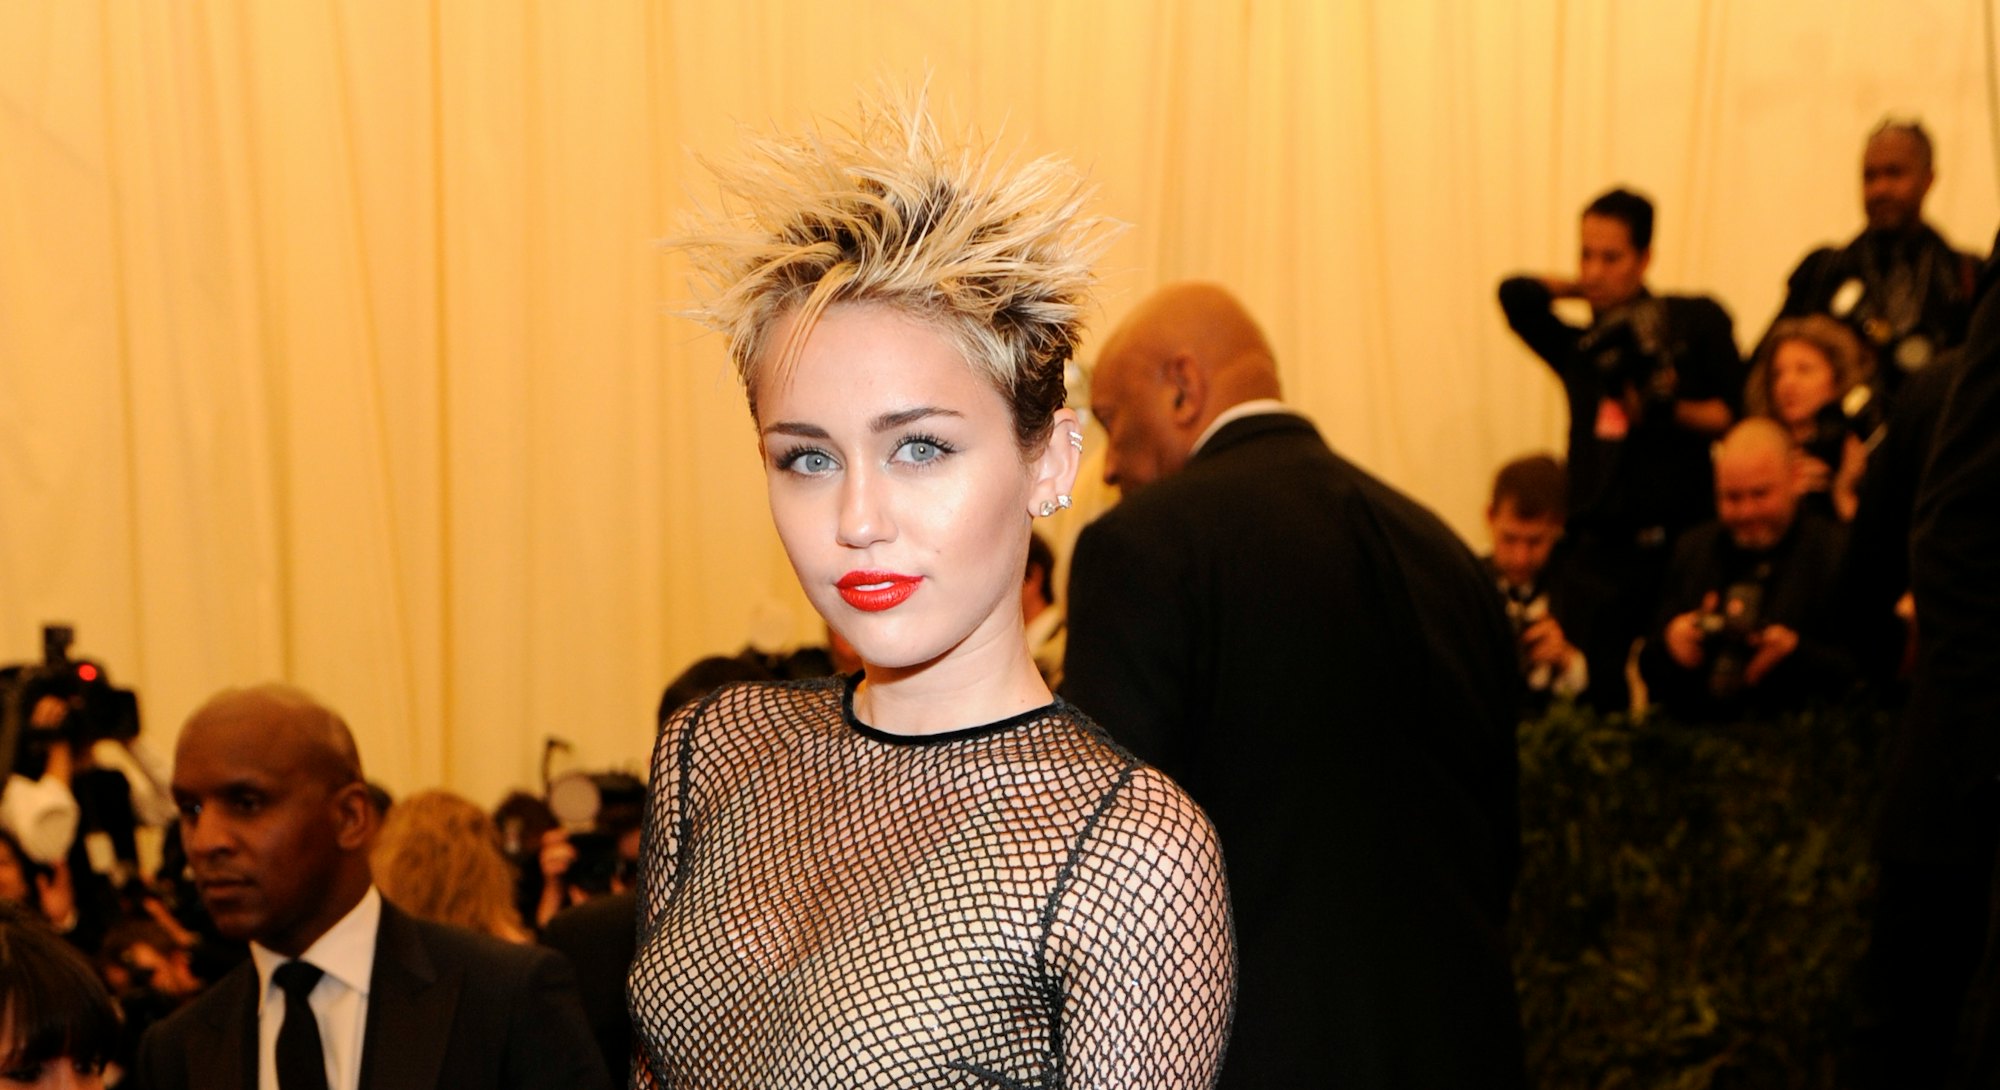 NEW YORK, NY - MAY 06: Miley Cyrus attends the Costume Institute Gala for the "PUNK: Chaos to Coutur...